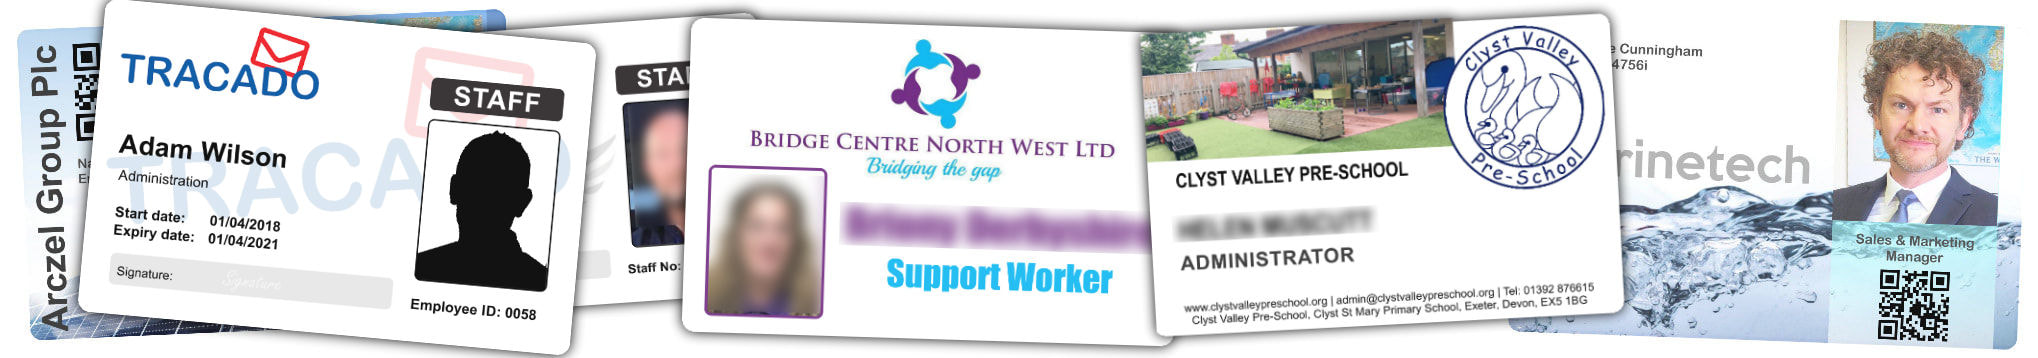 Worcester examples of staff photo ID cards | samples of employee Identity card printing | Workers ID cards printed in 